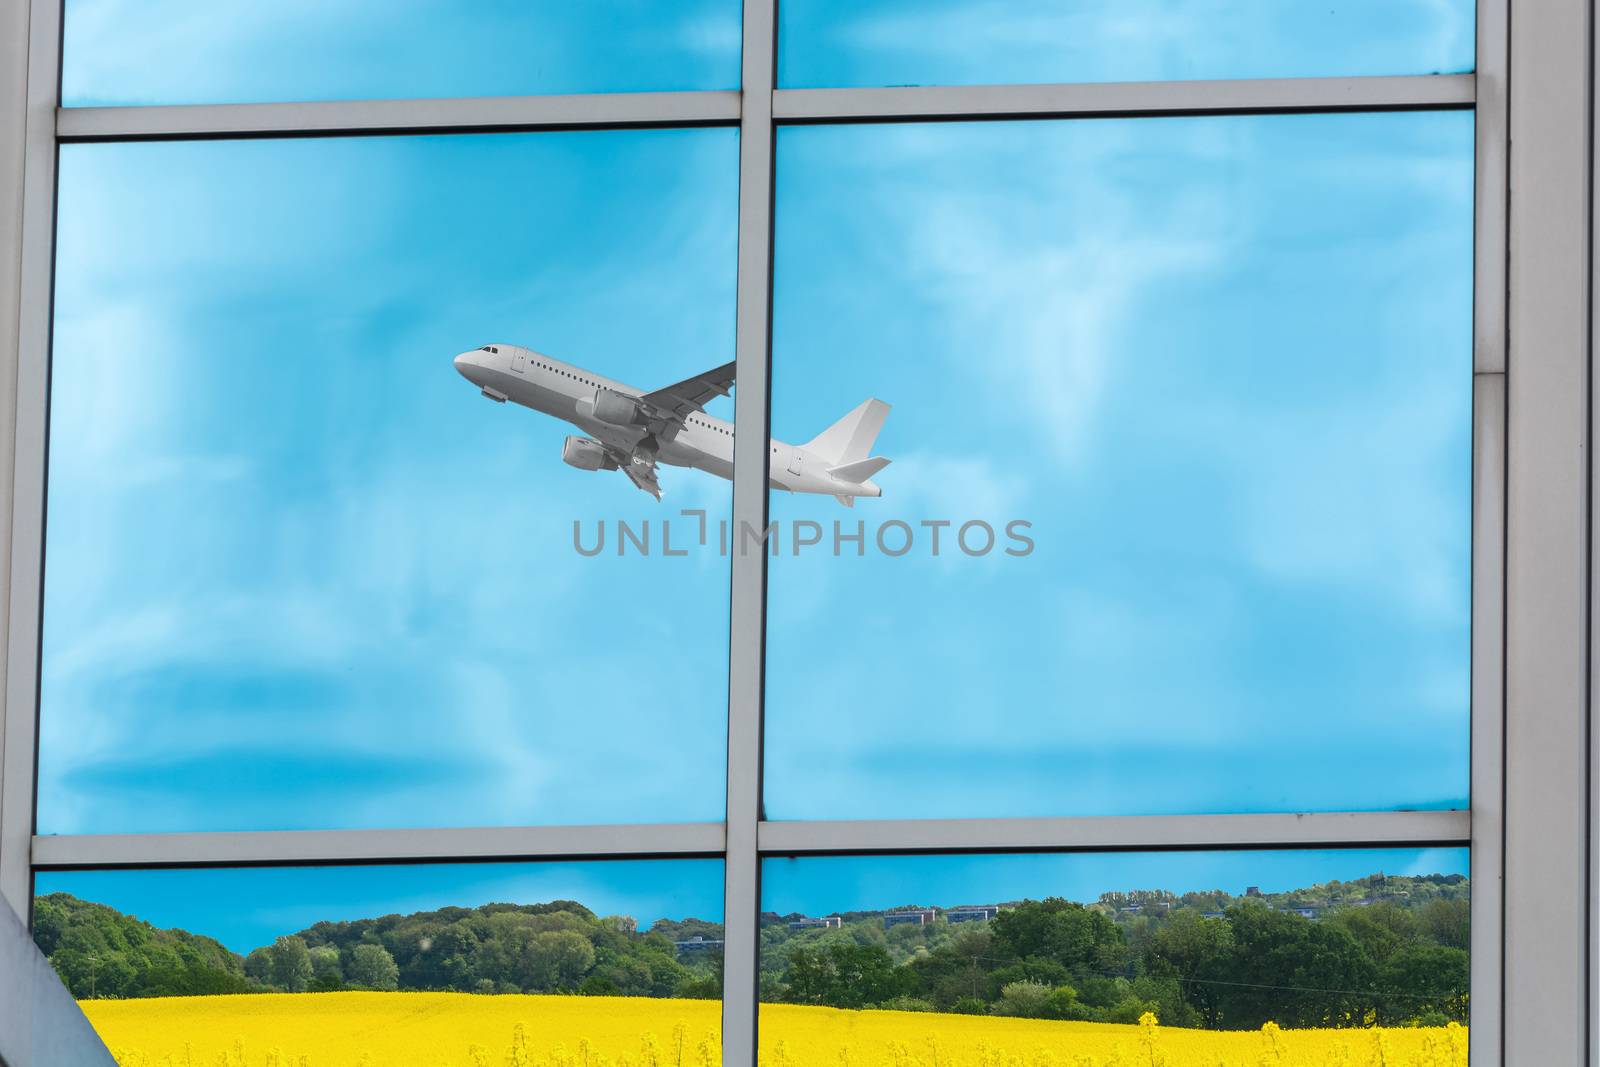 Beautiful glass building facade with reflections of an airplane during startup.